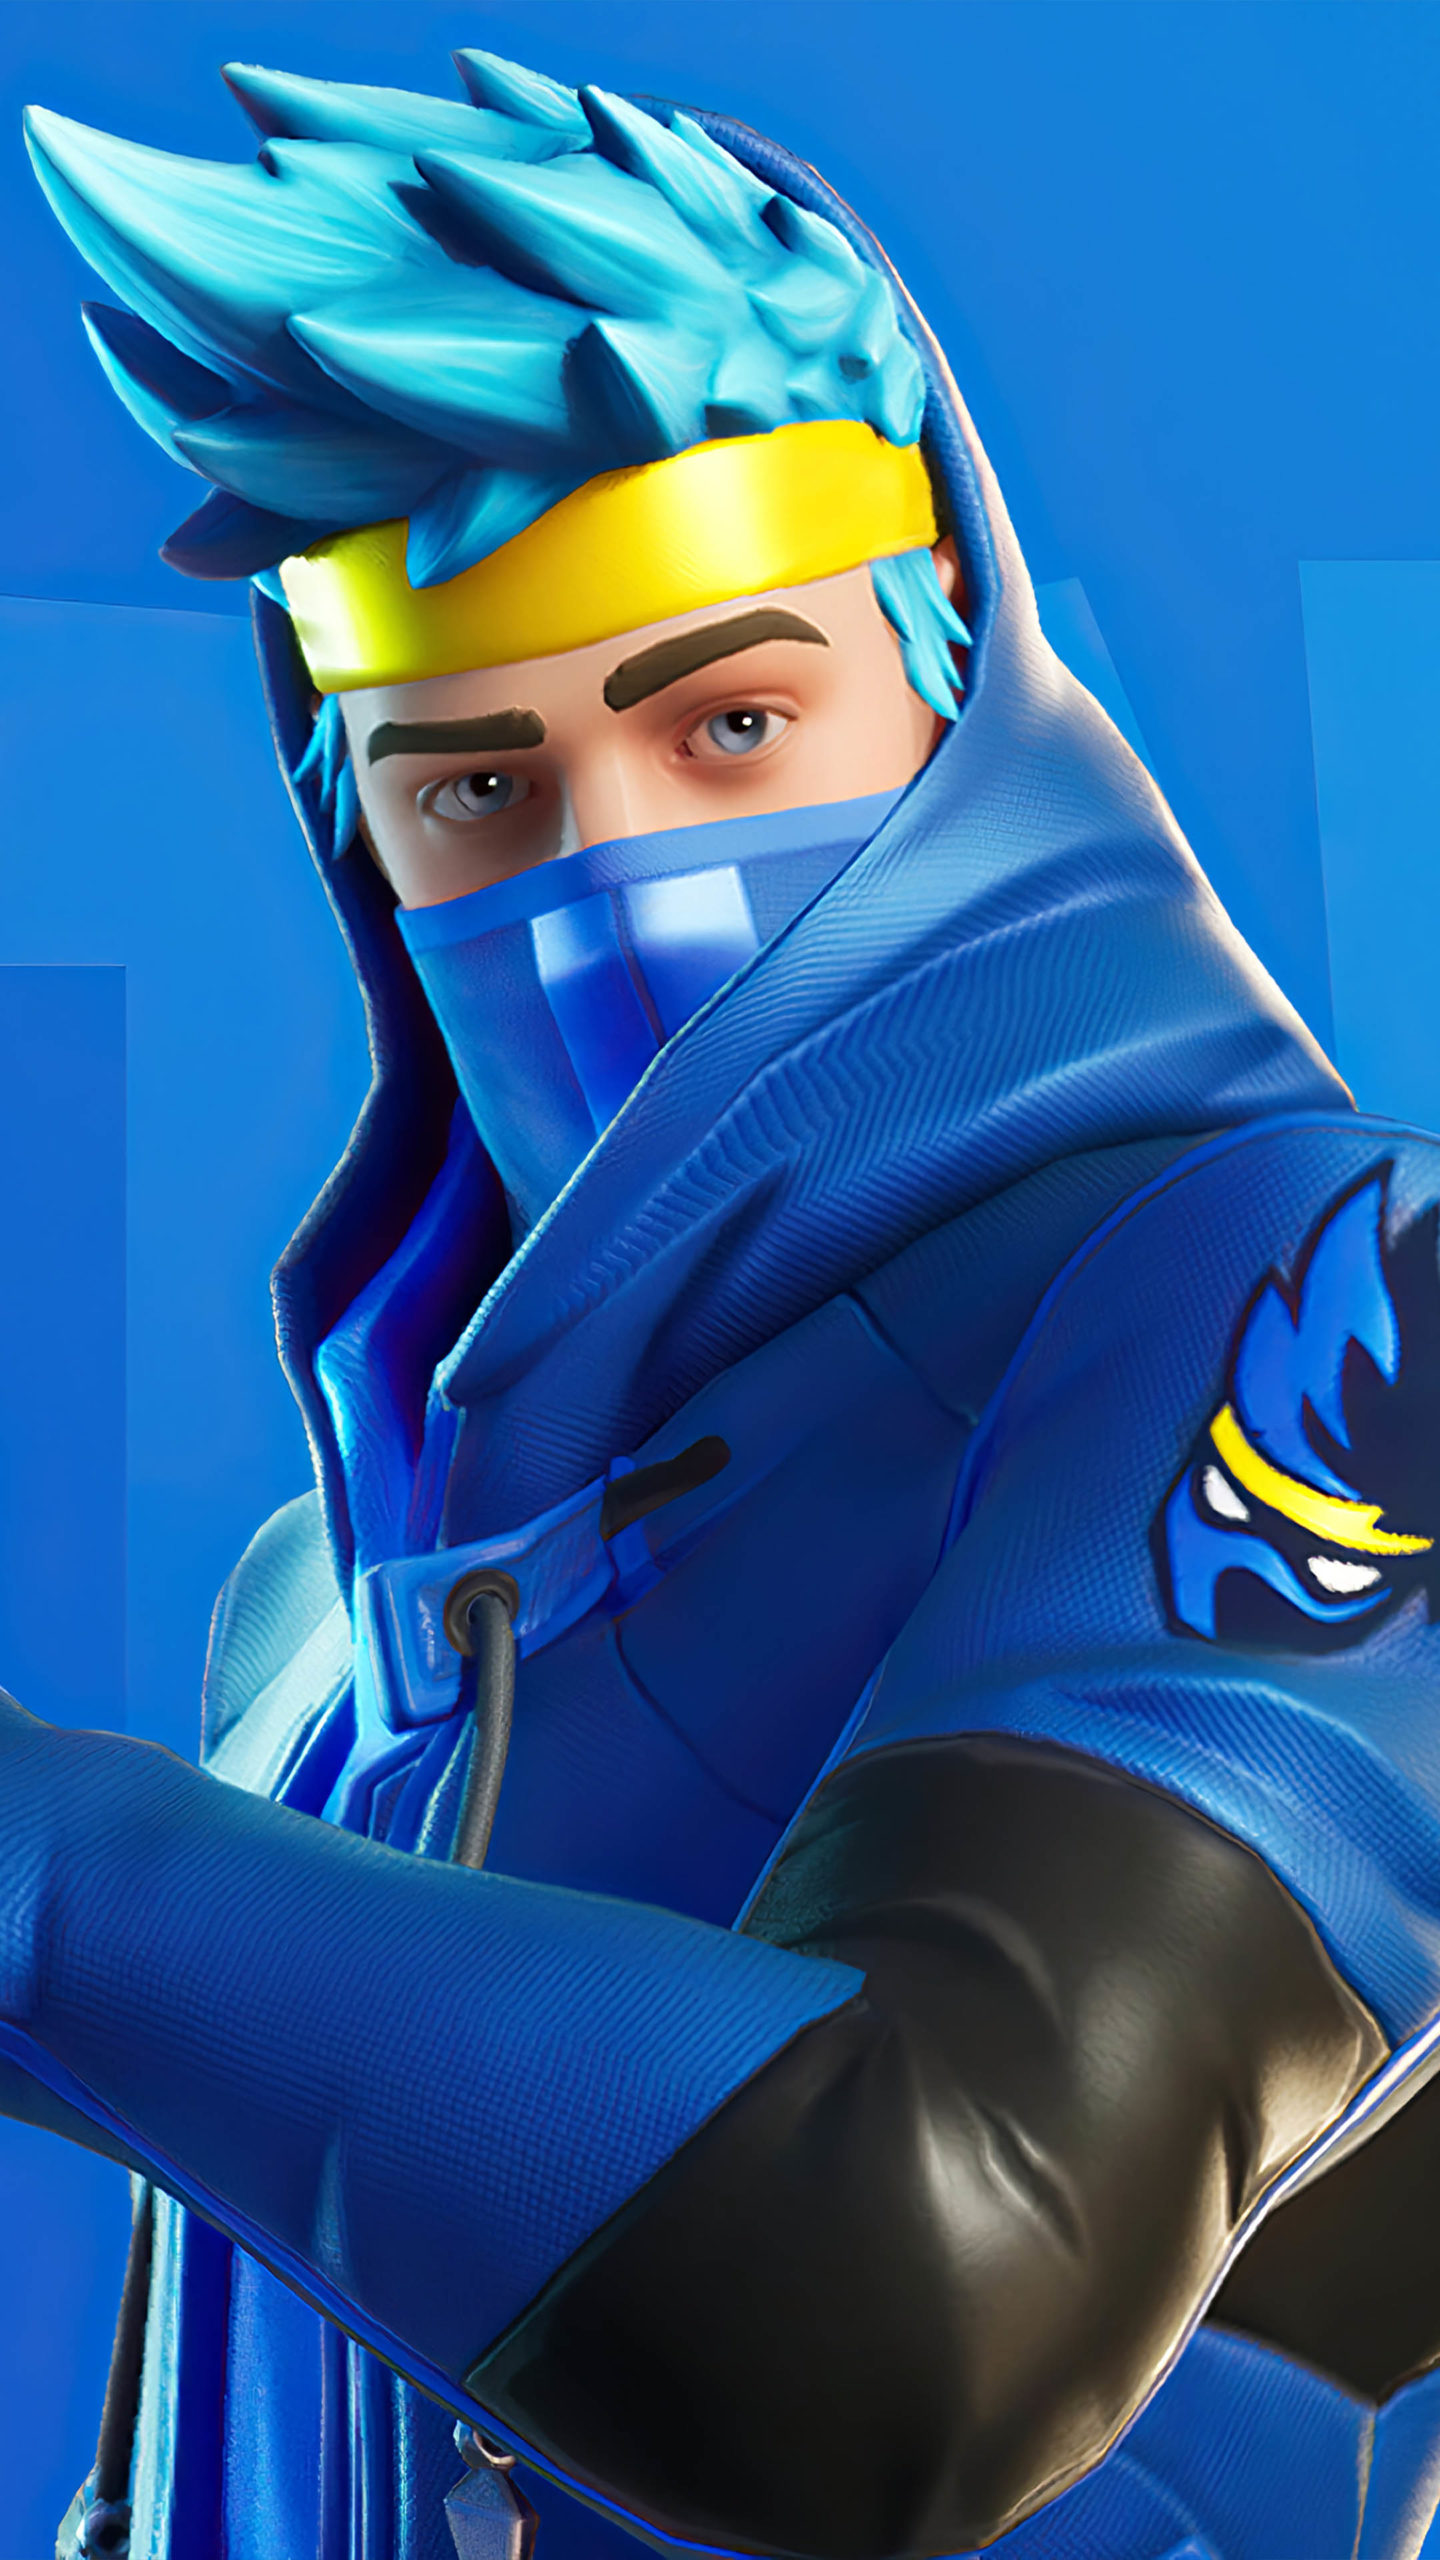 New Infinity Fortnite Skin Wallpaper, HD Games 4K Wallpapers, Images and  Background - Wallpapers Den